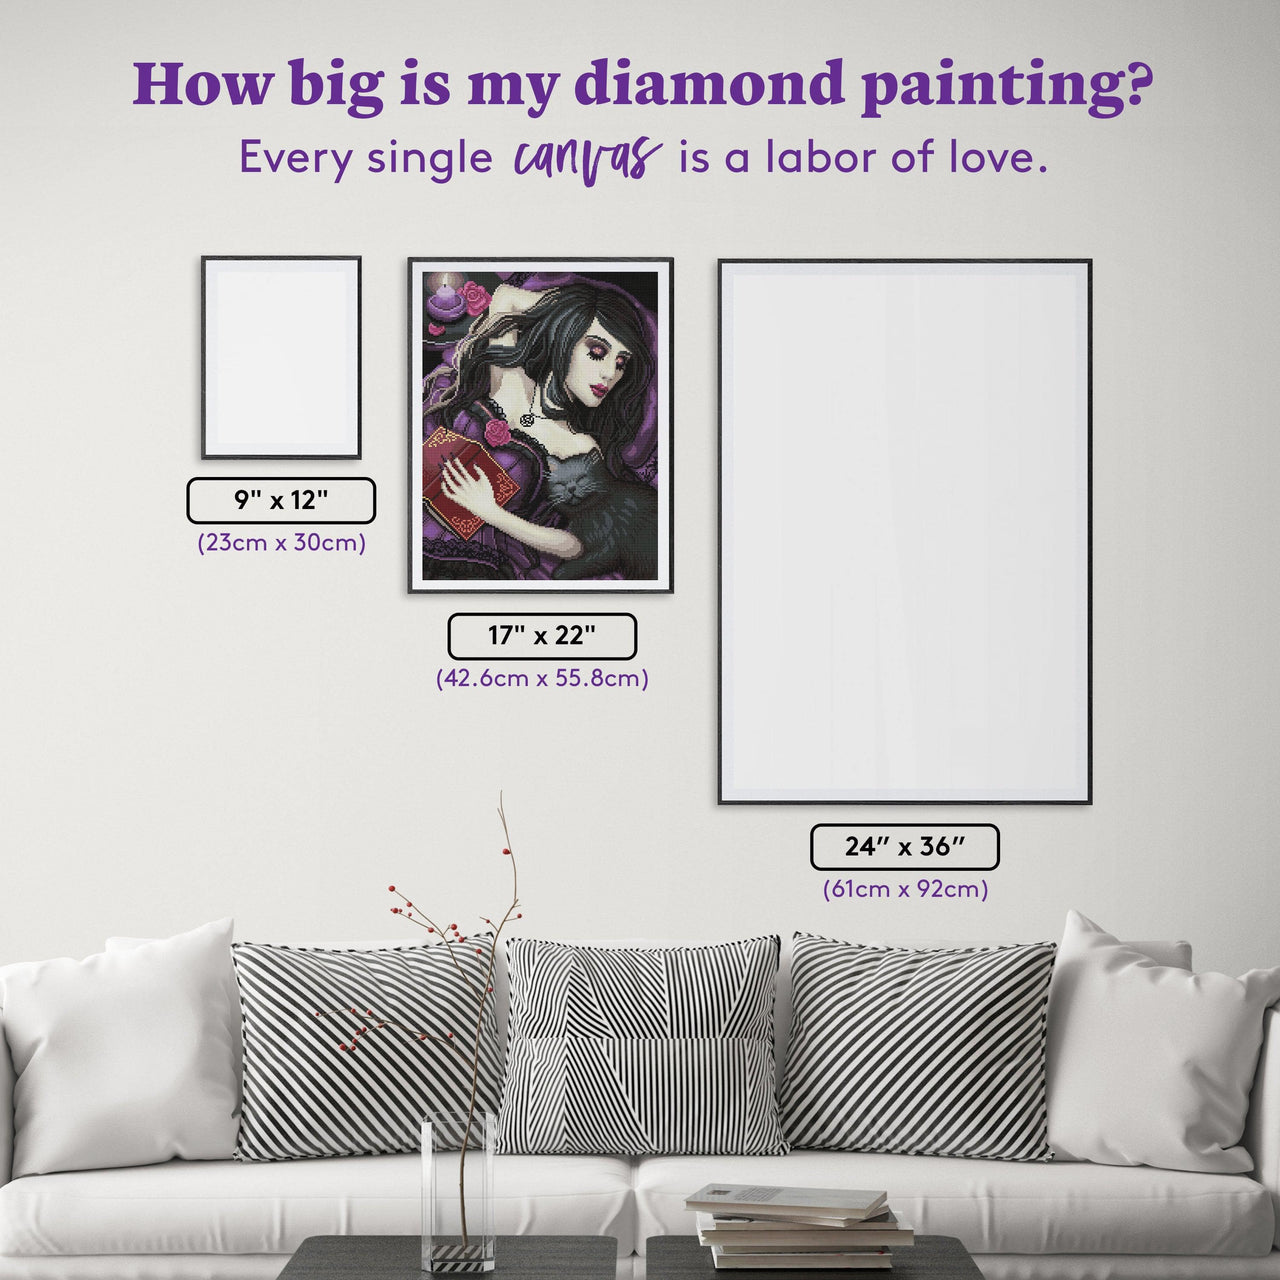 Diamond Painting Dreaming Away 17" x 22" (42.6cm x 55.8cm) / Round with 40 Colors including 2 ABs / 30,248